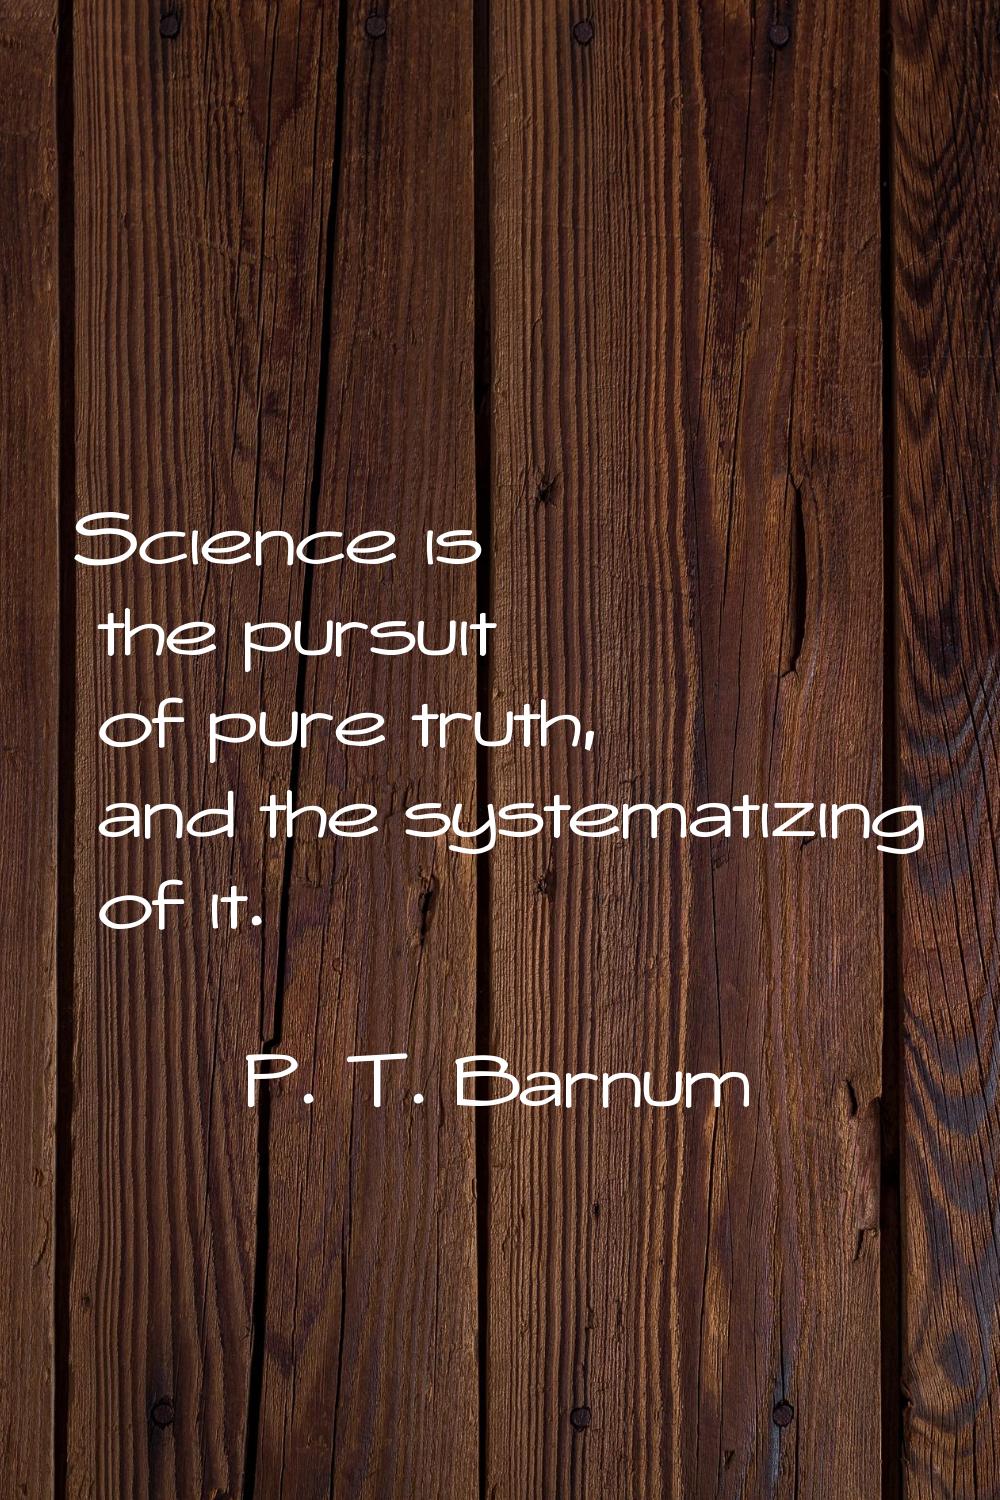 Science is the pursuit of pure truth, and the systematizing of it.